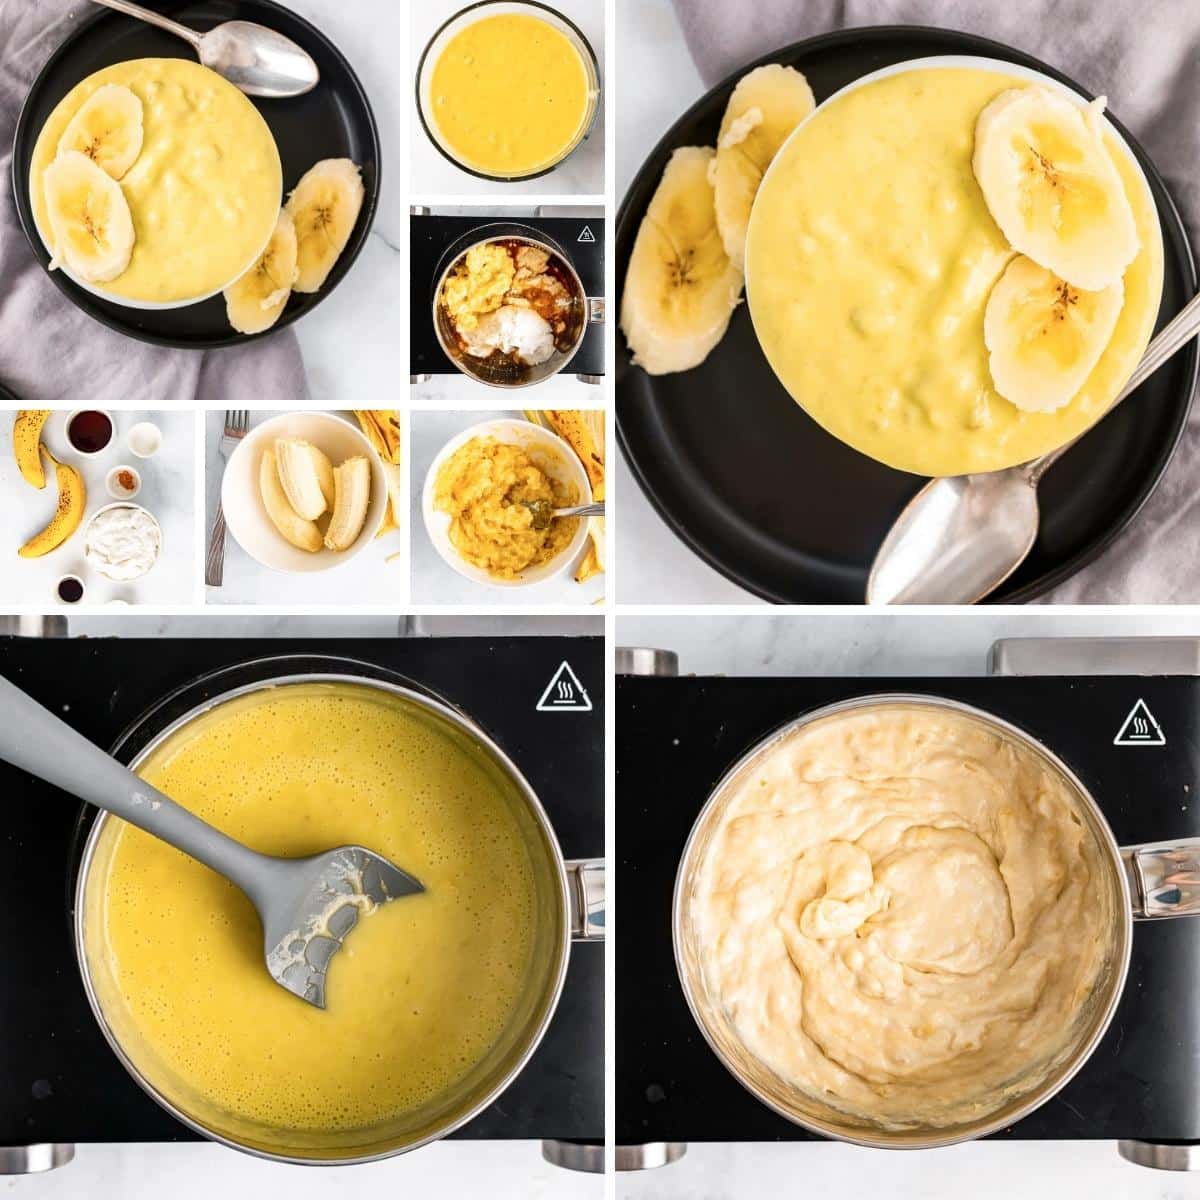 how to make banana pudding from scratch